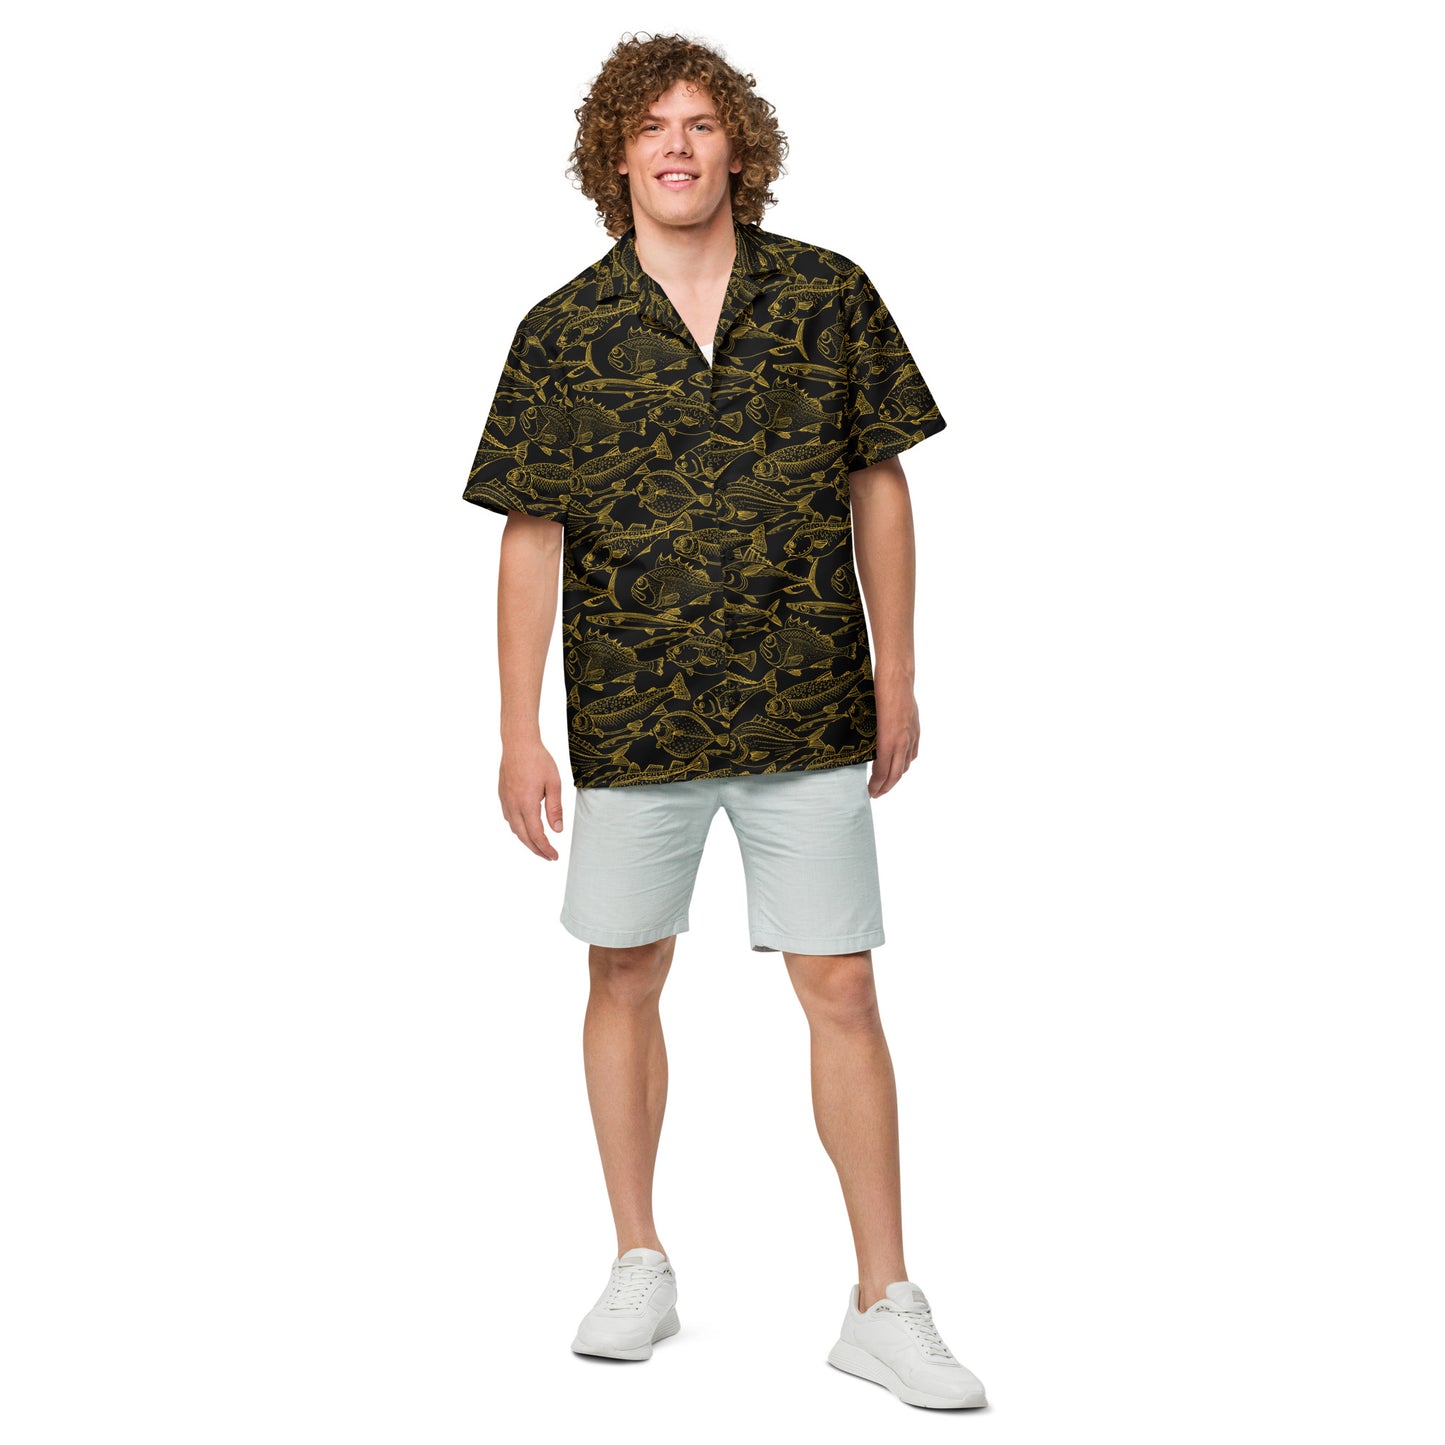 Riches of the Day button shirt - Tropical Seas Clothing 